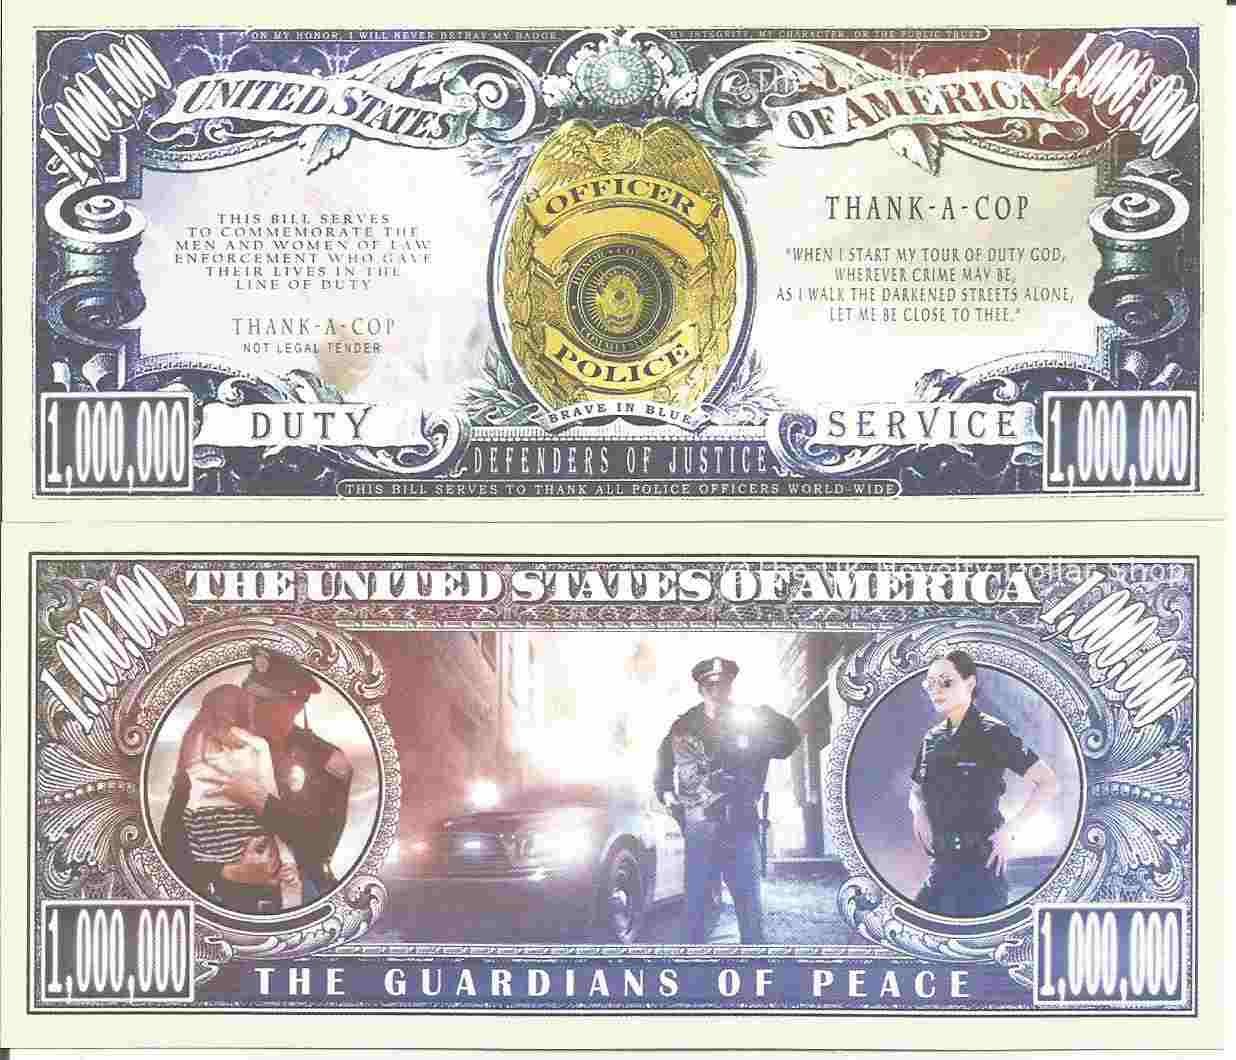 Police Officers Thank A Cop Defenders of Justice Million Dollar Bills x 2 Duty